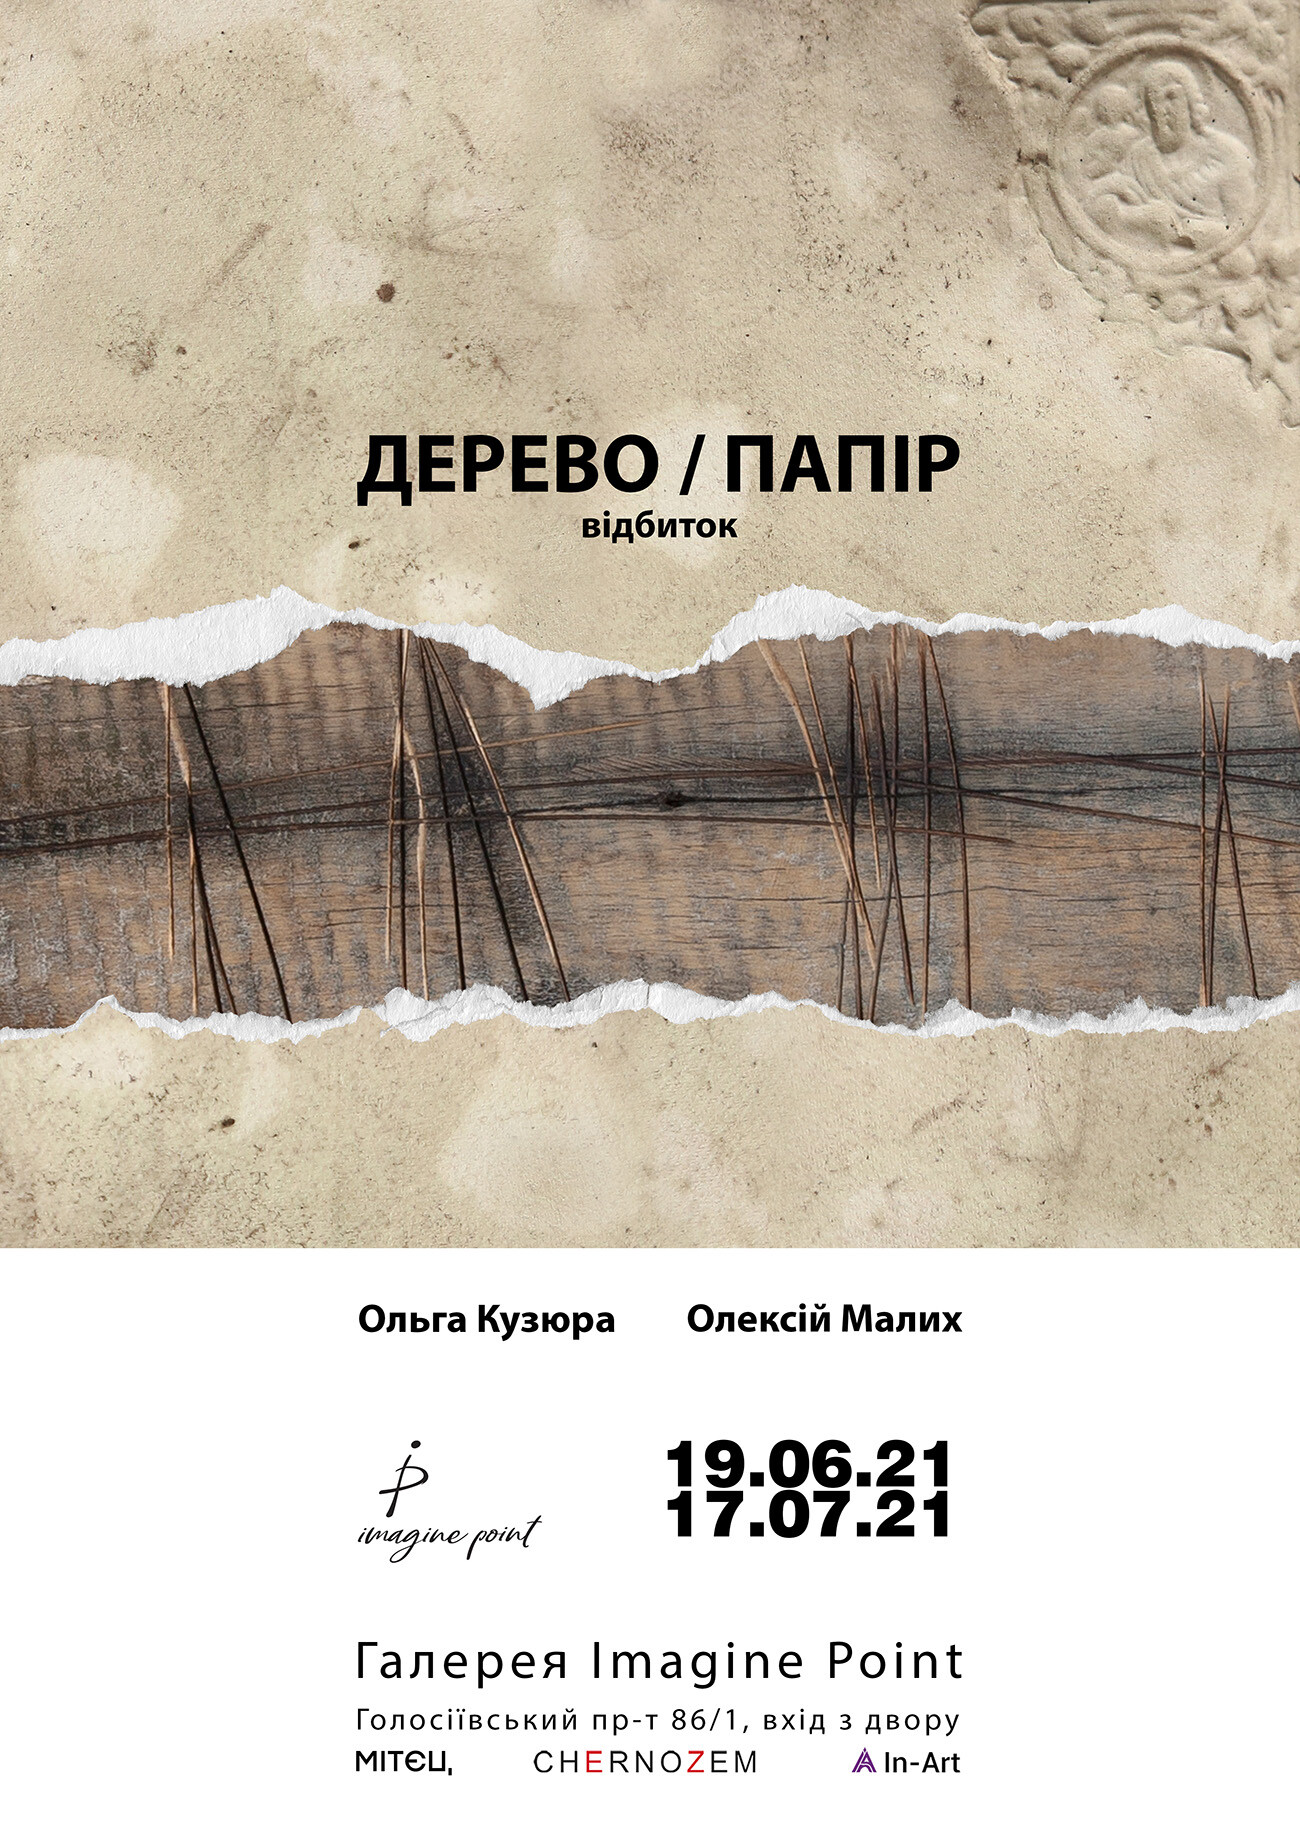 OPENING OF THE "WOOD/PAPER" PROJECT WITH OLEKSIY MALYKH